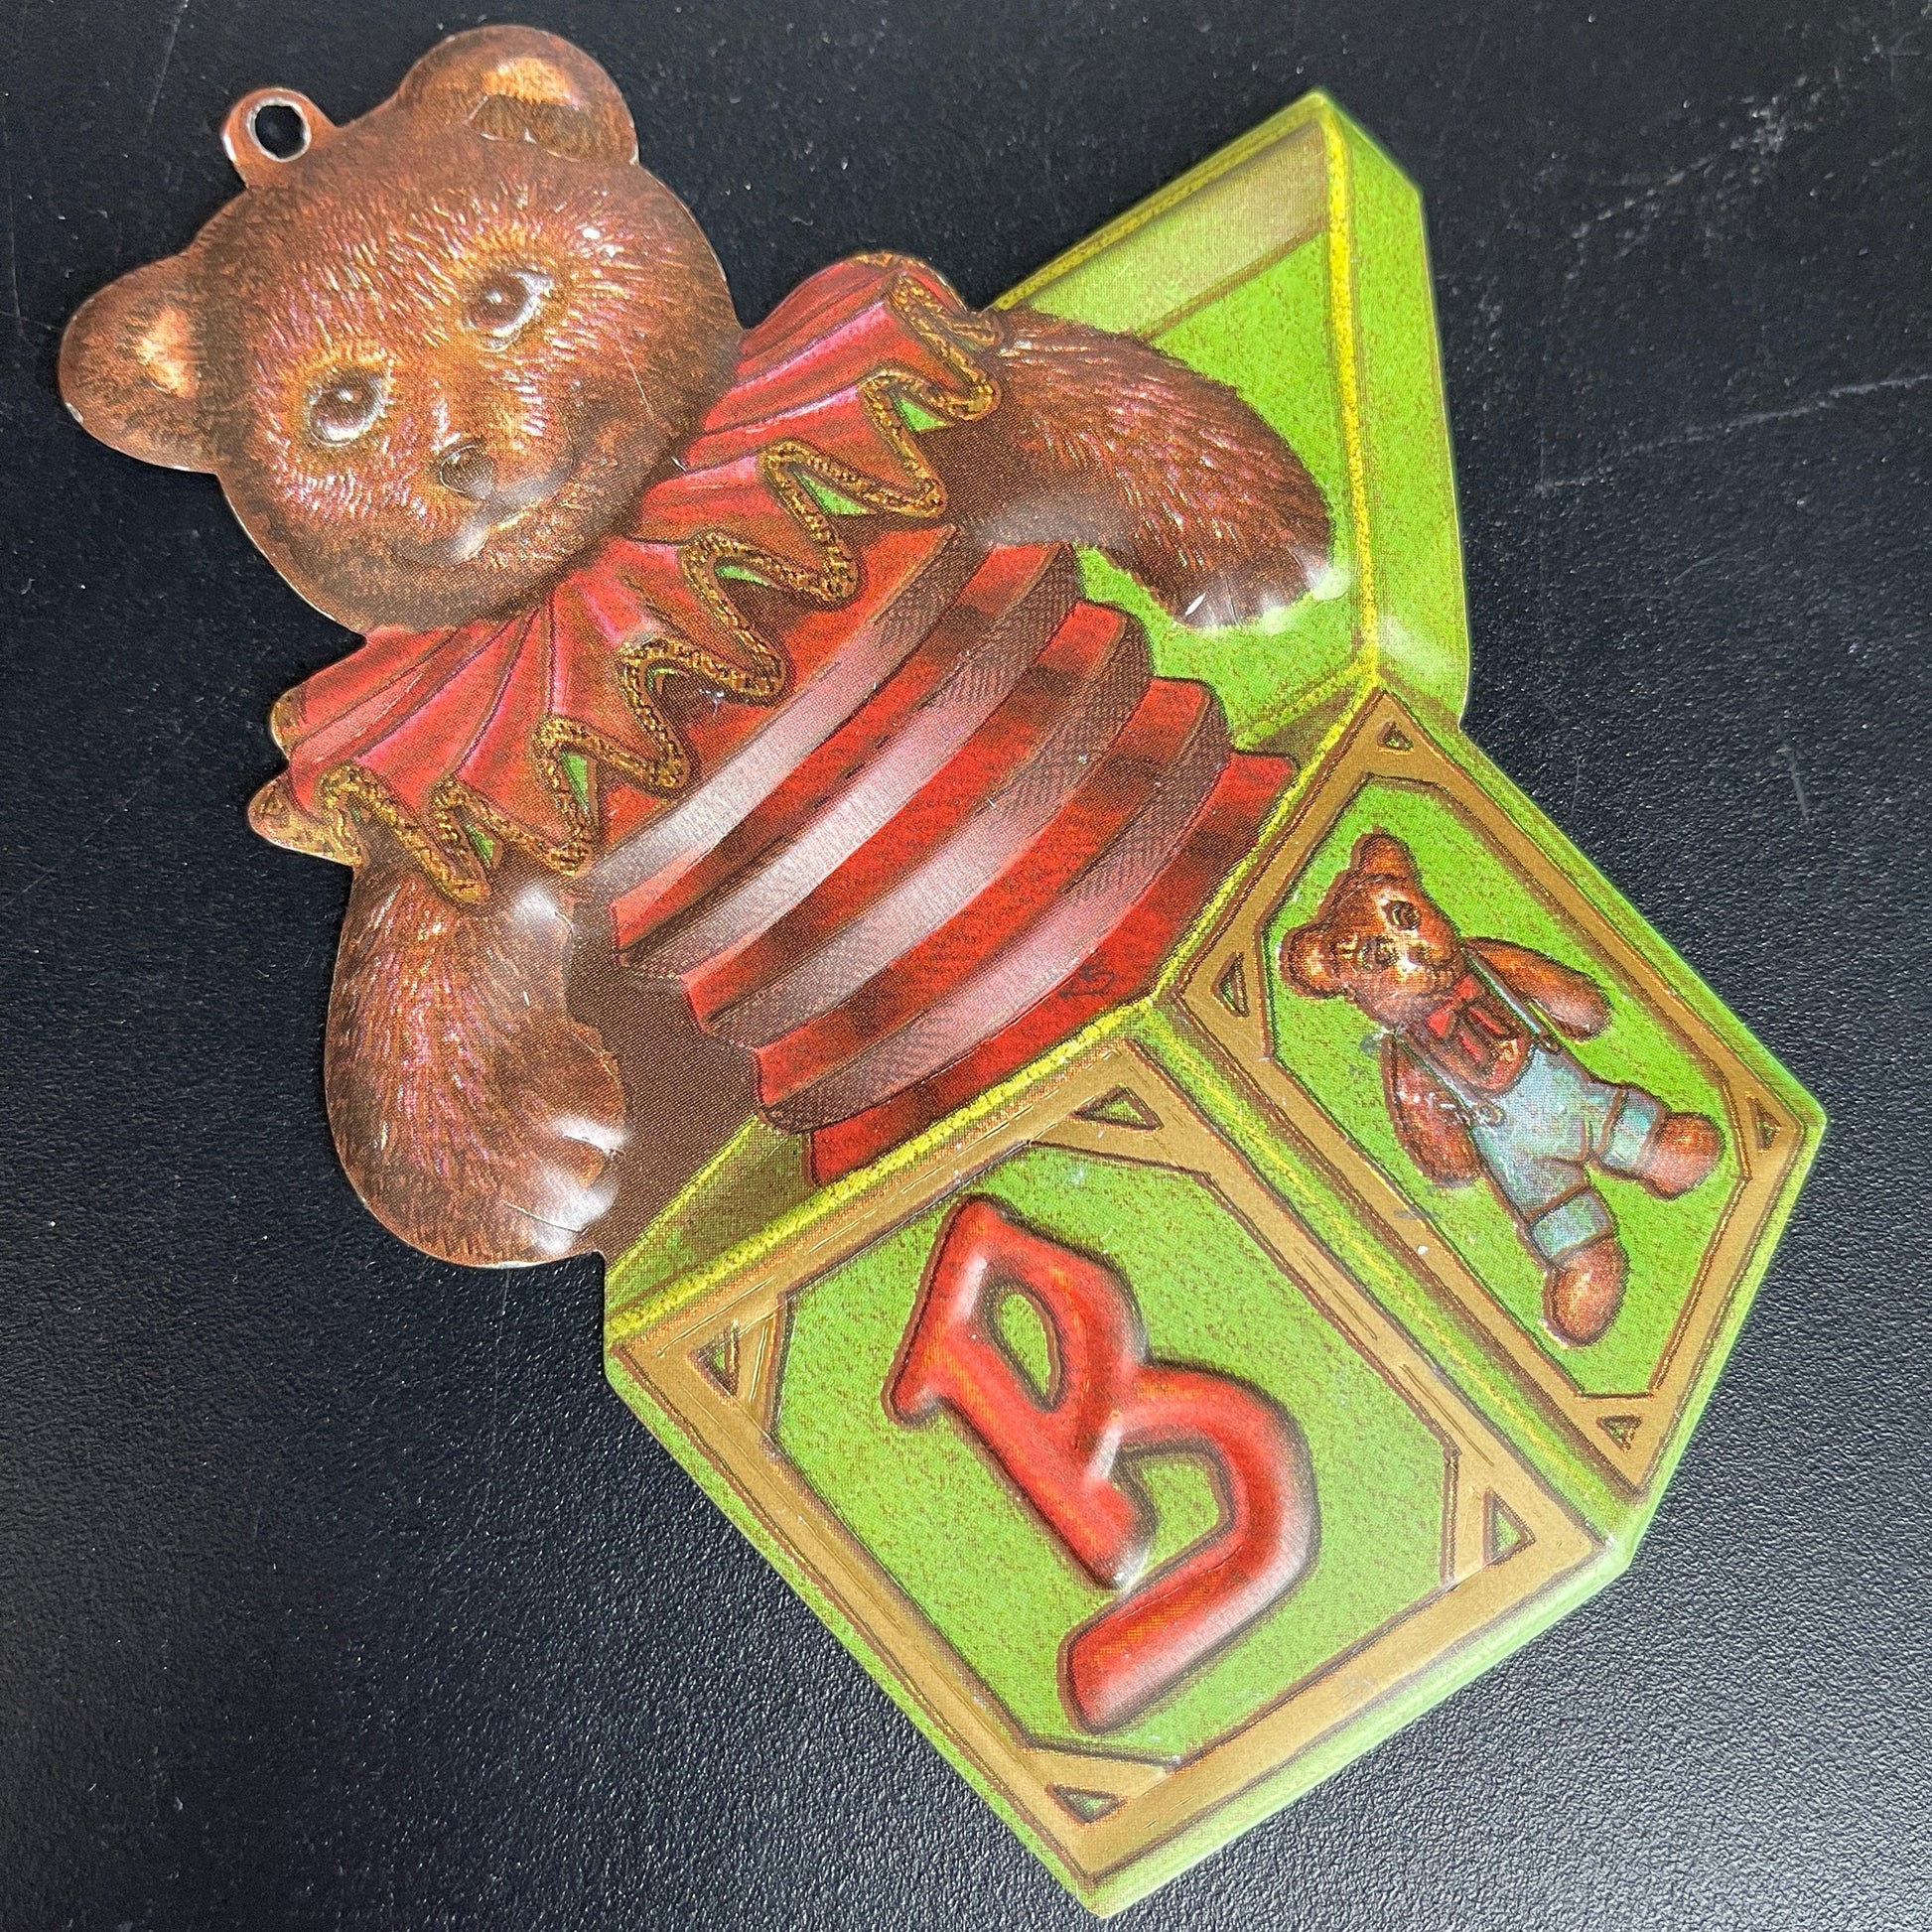 Department 56 Teddy Bear Jack in the Box Metal vintage collectible Christmas ornament